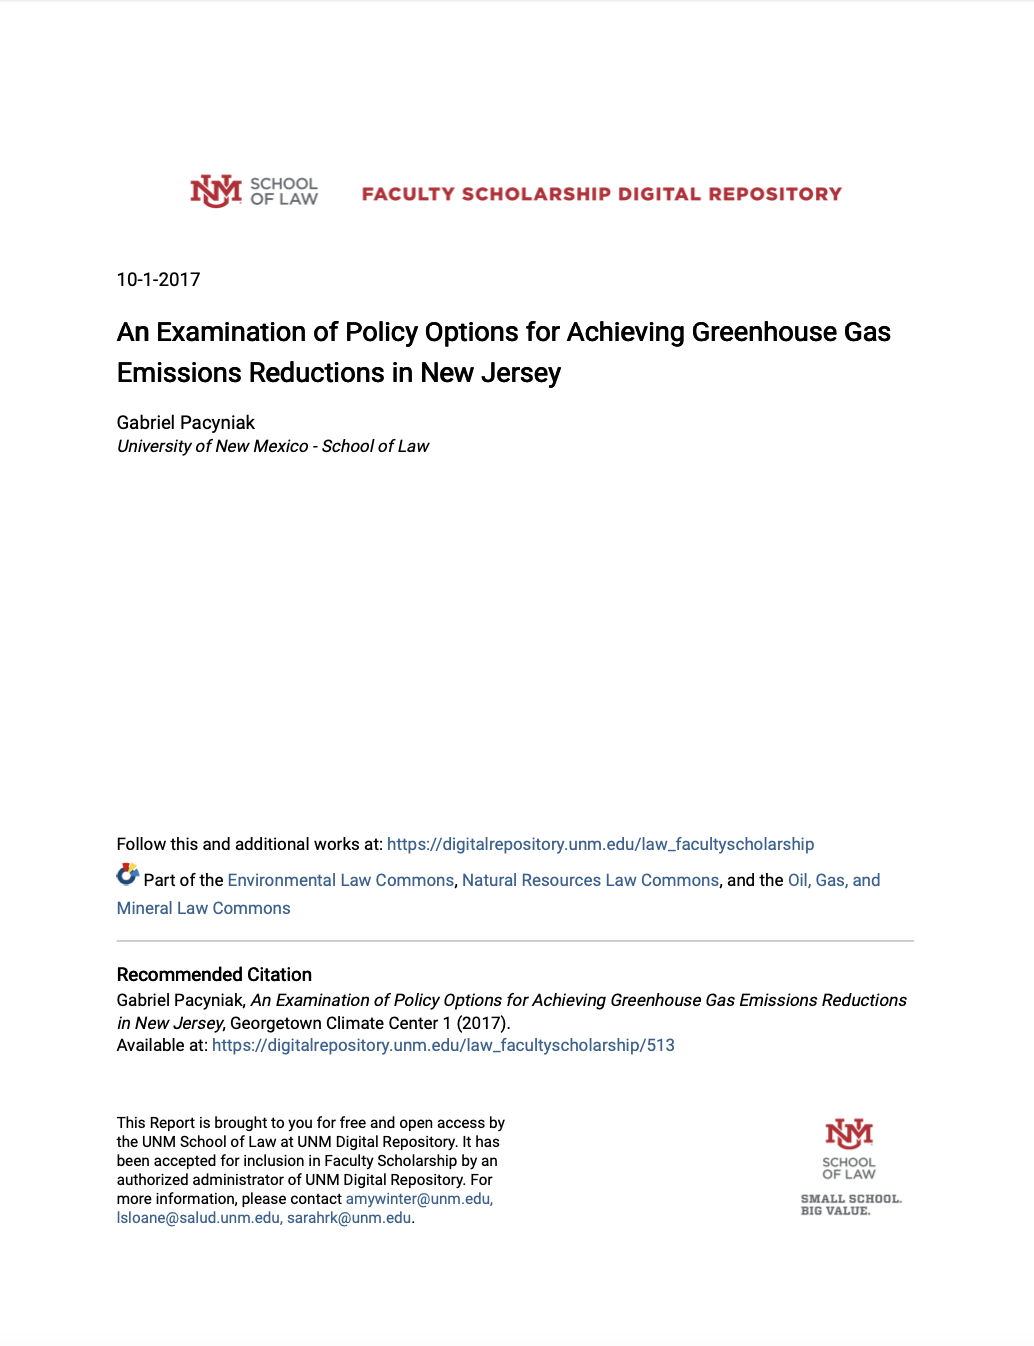 An Examination of Policy Options for Achieving Greenhouse Gas Emissions Reductions in New Jersey